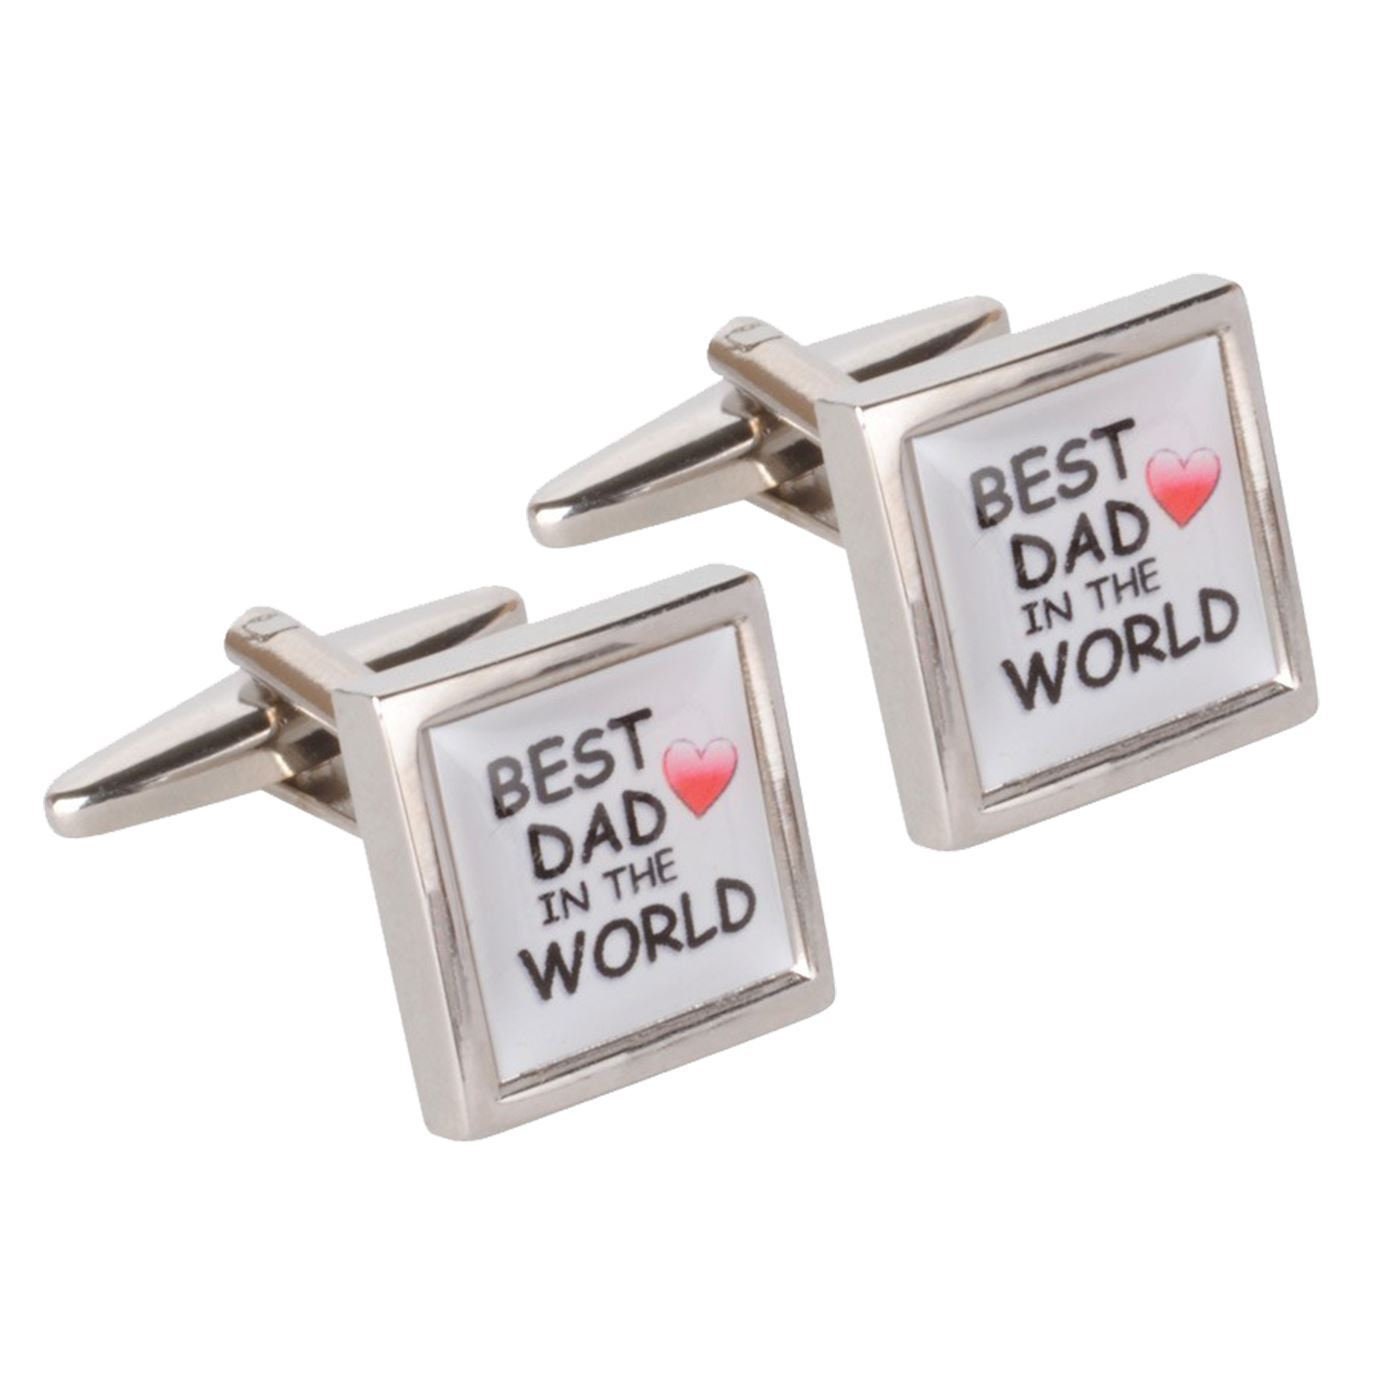 the5thL Best Dad in the World Cufflinks Fathers Day Gemelos